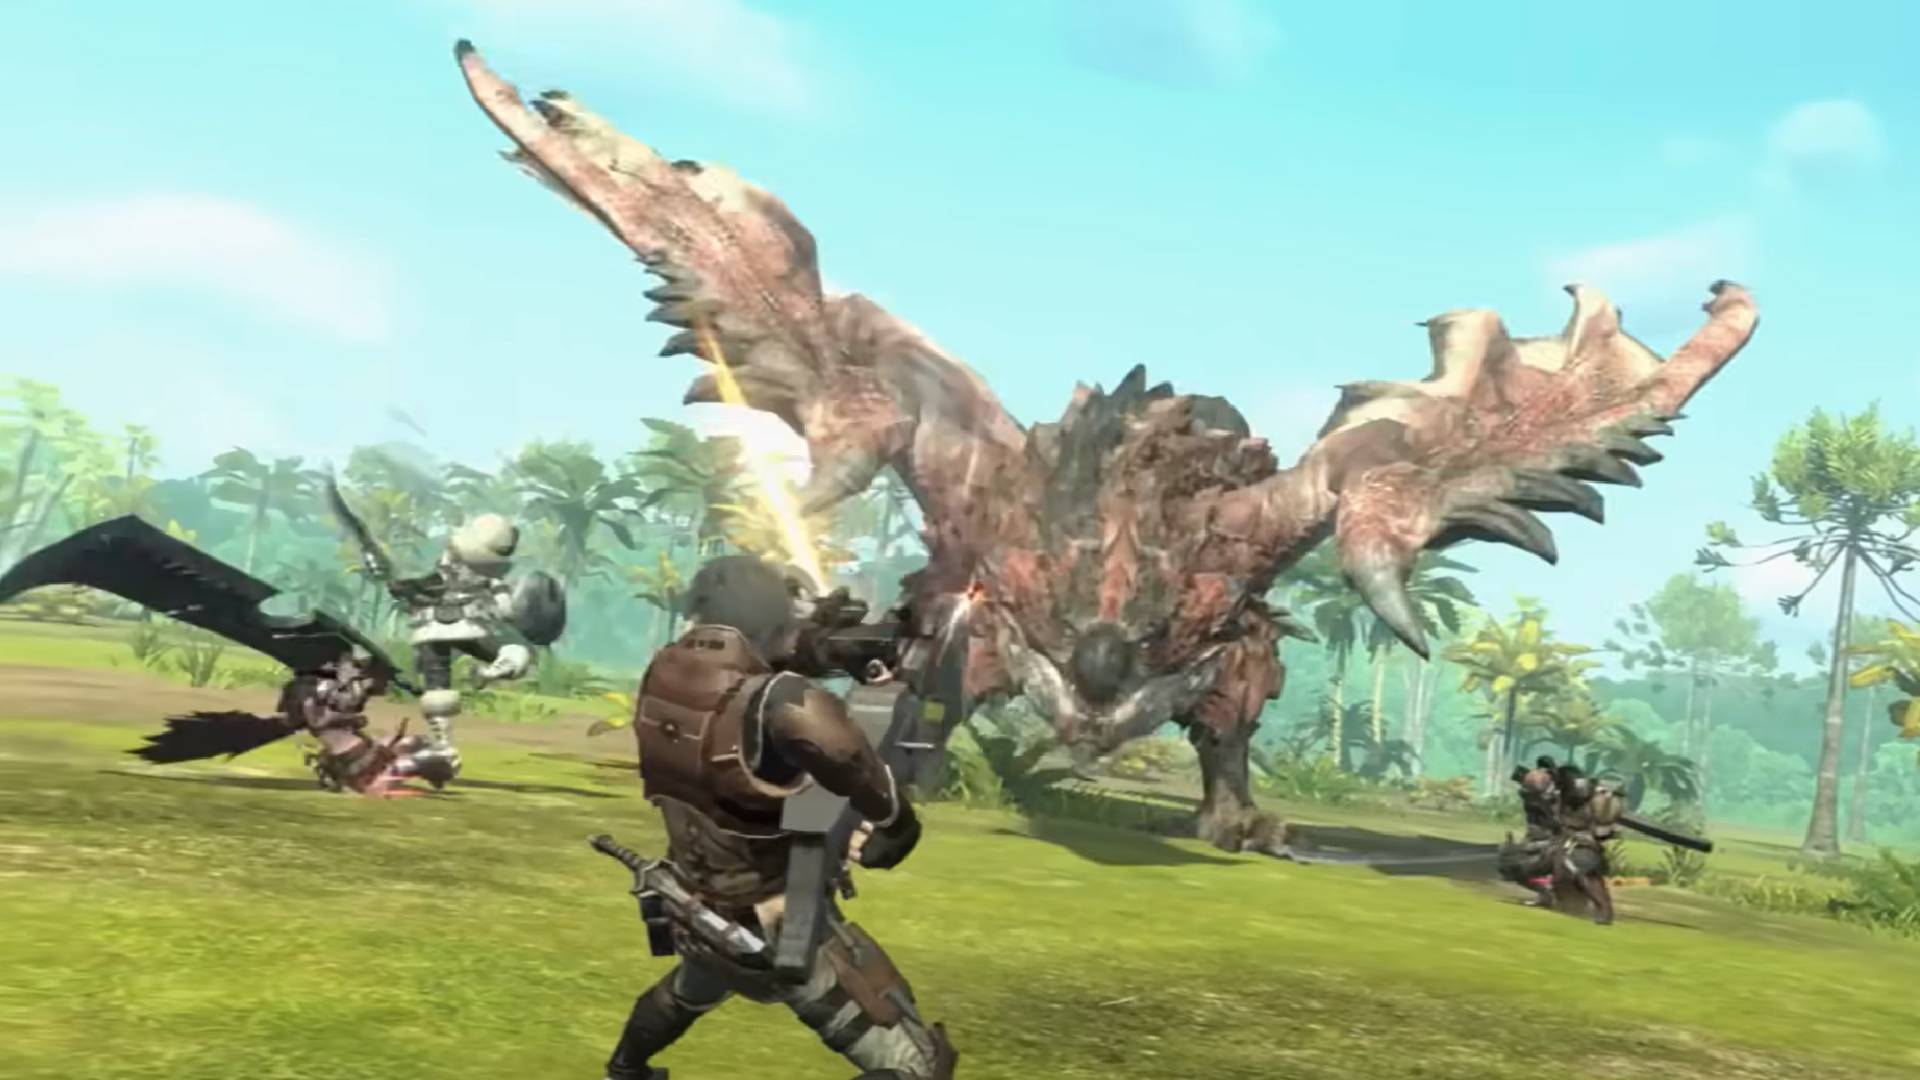 Monster Hunter: Monster Hunter Now: All you need to know about